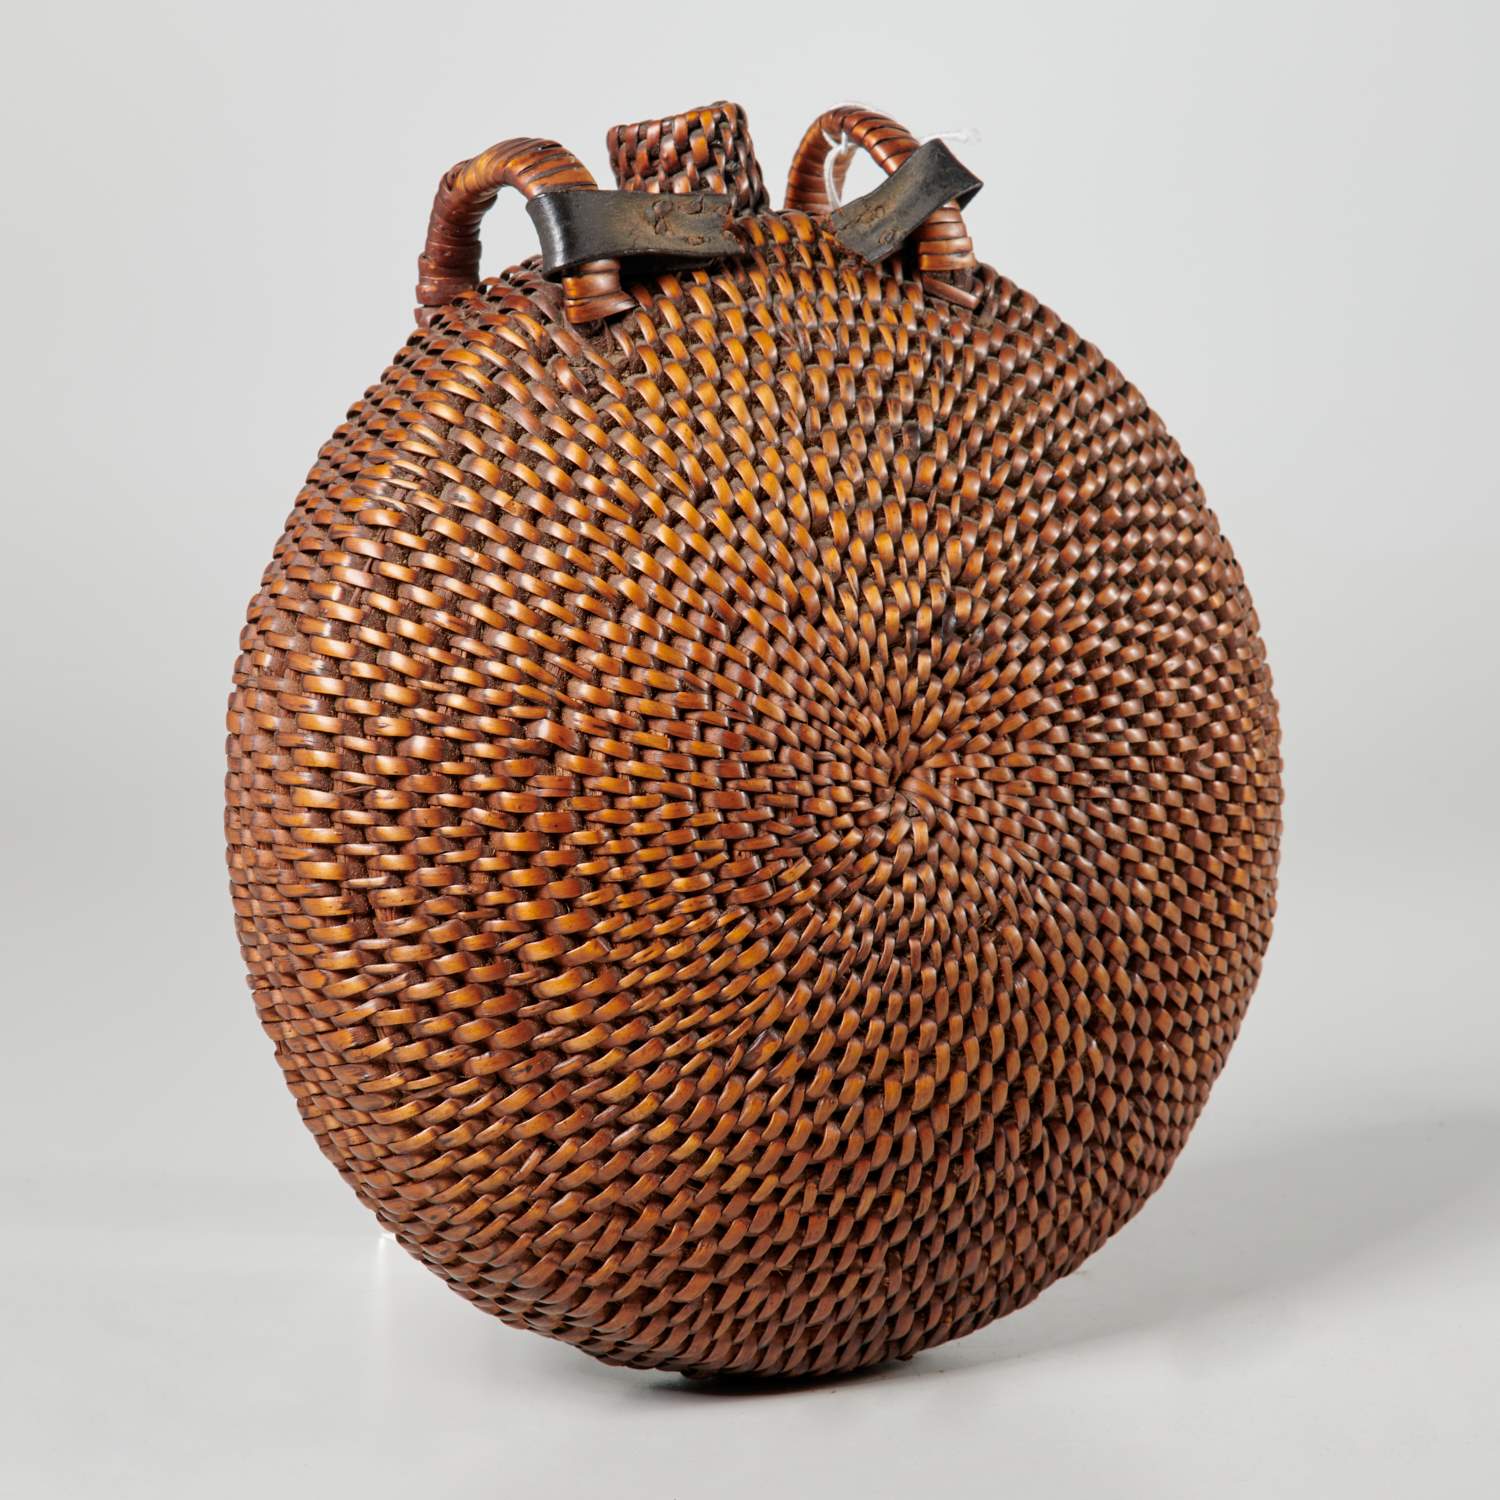 NATIVE AMERICAN WOVEN BASKETRY 361d51